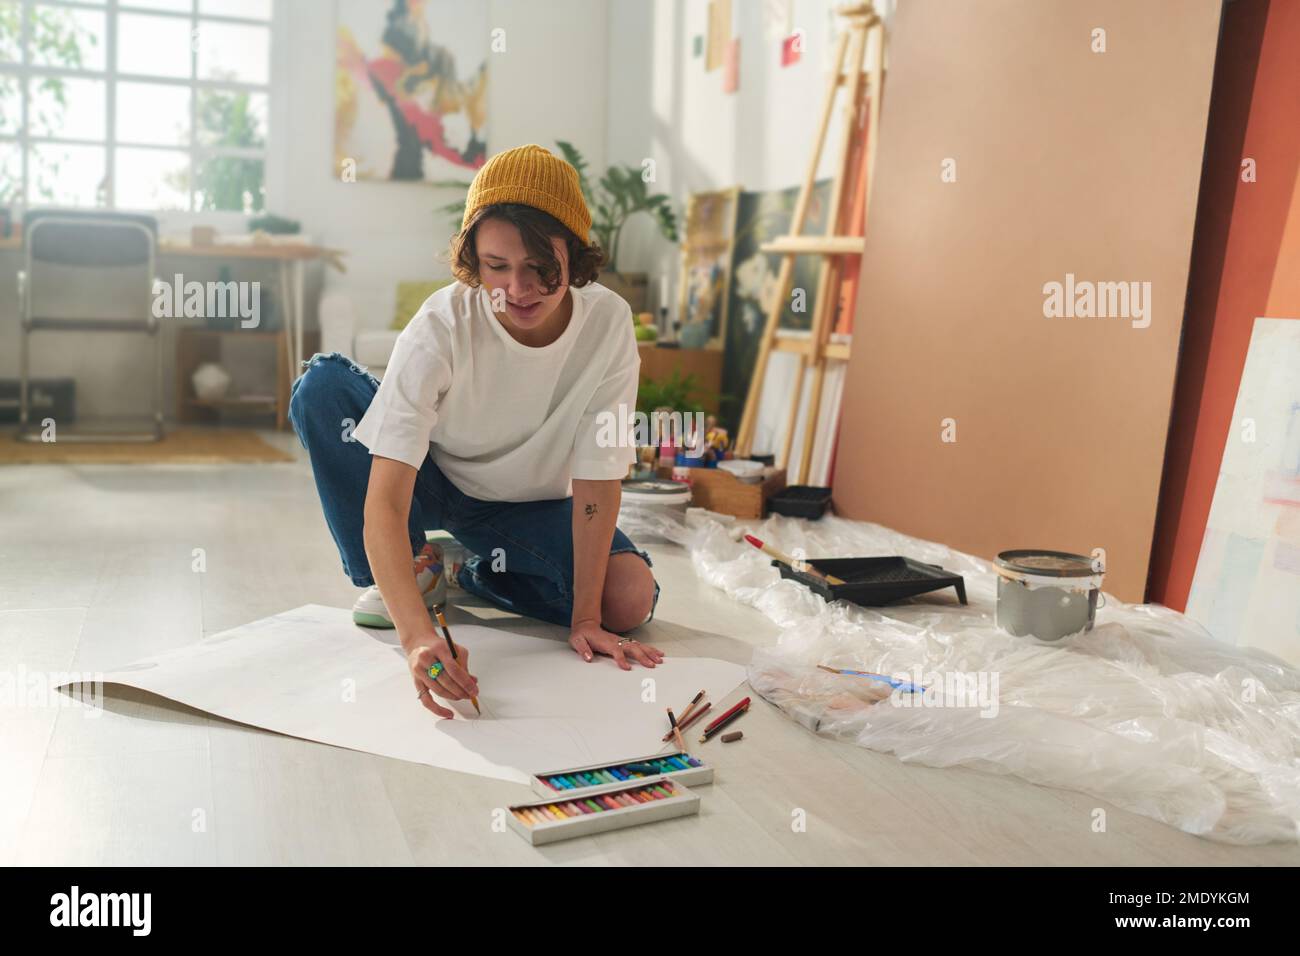 Pretty girl in casualwear sitting on the floor and drawing with crayons while slightly bending over large sheet of white blank paper Stock Photo